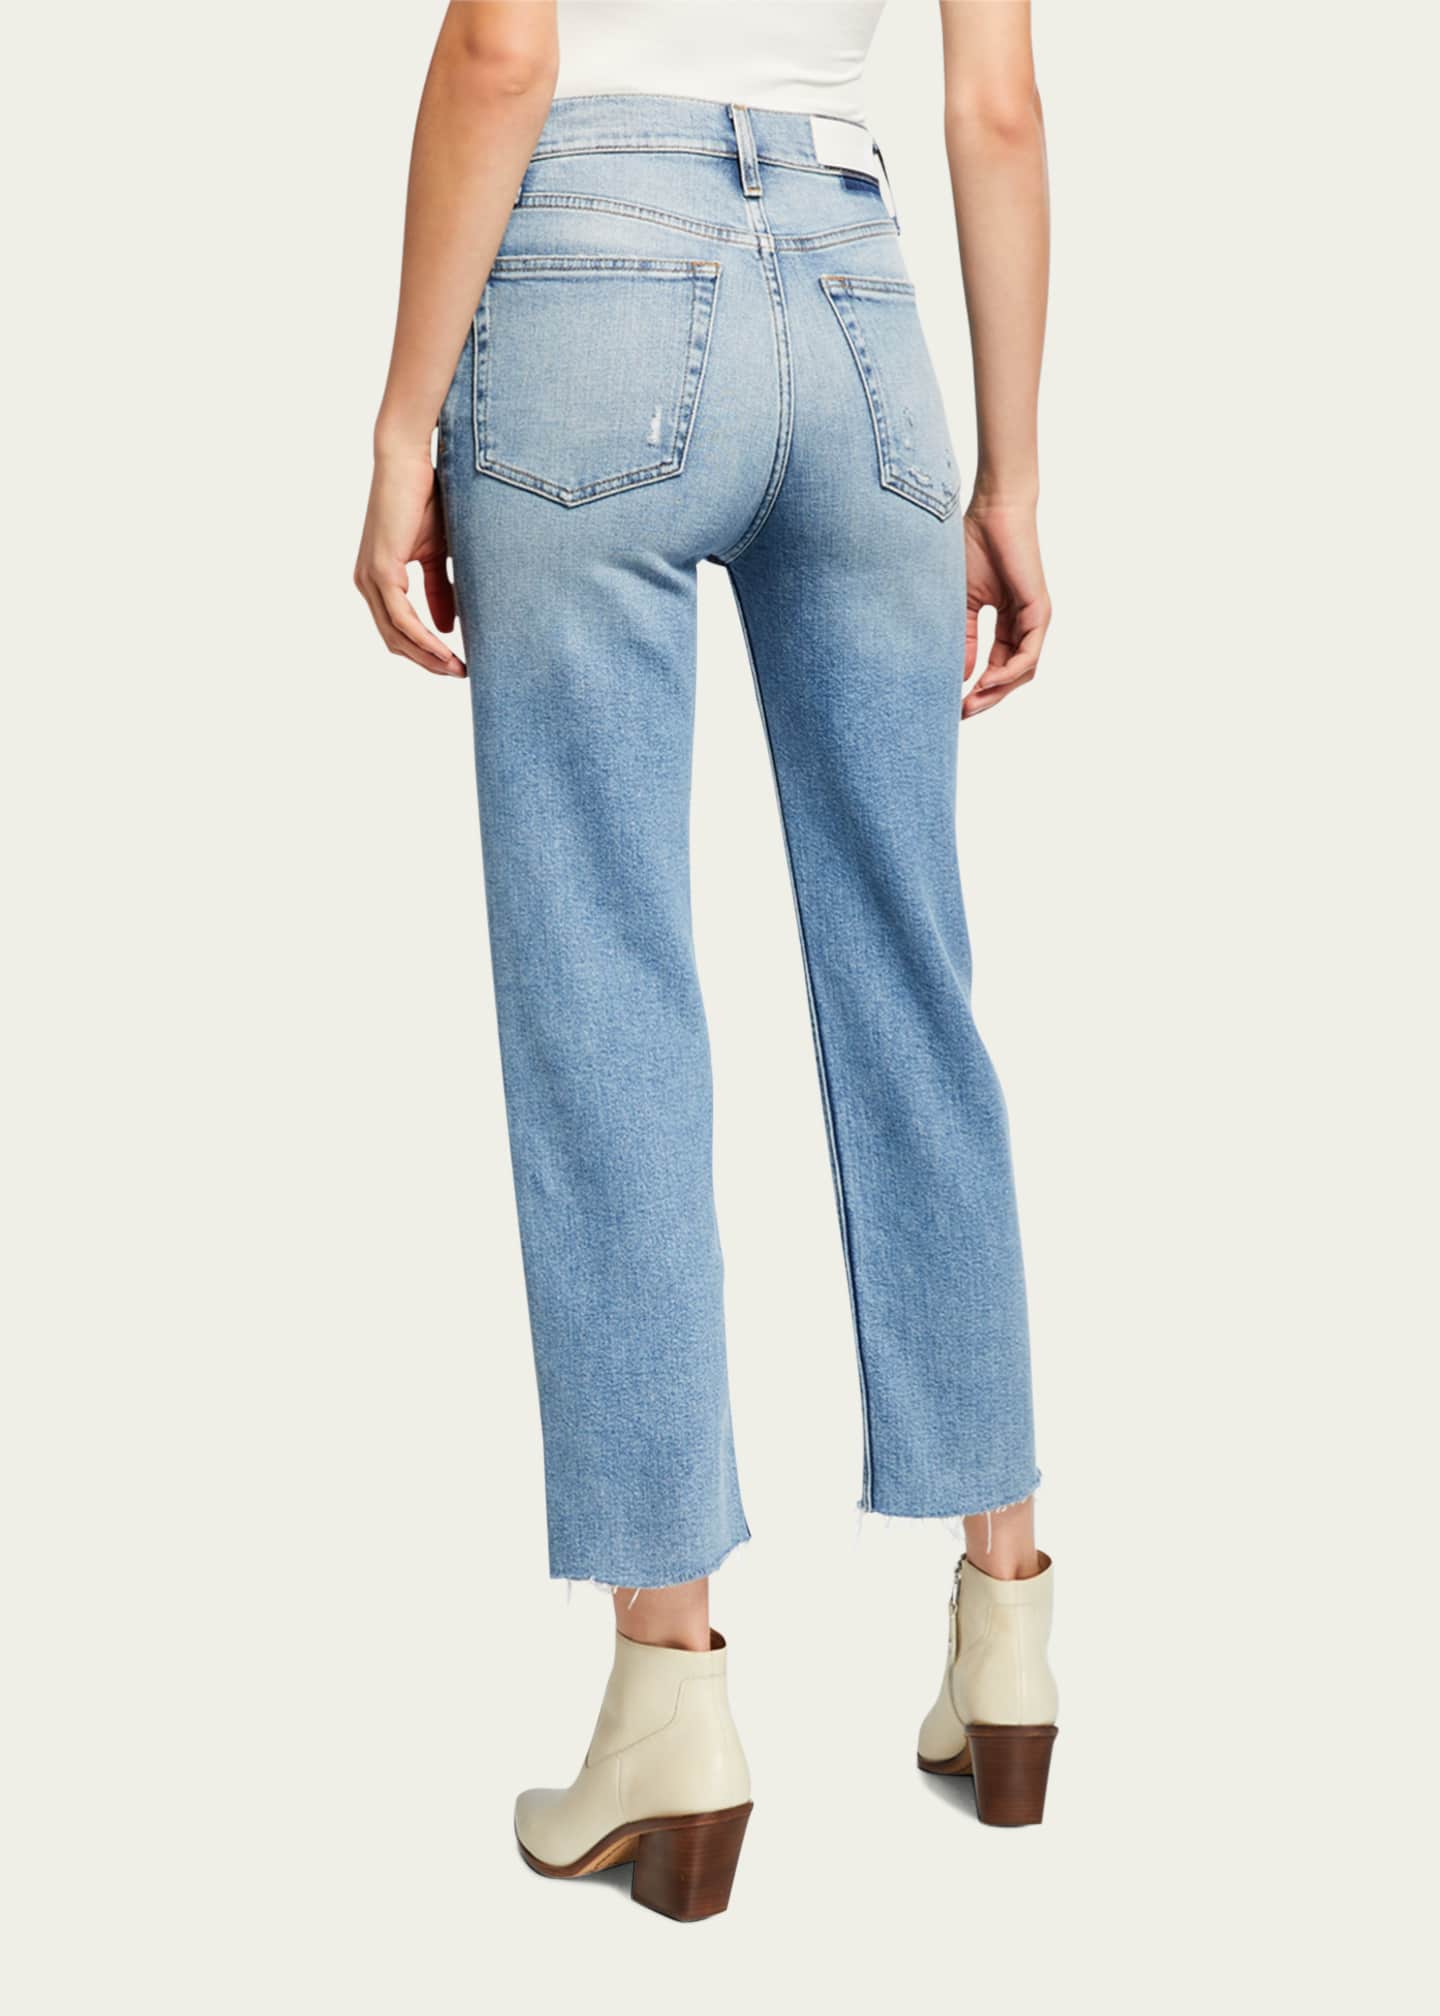 RE/DONE High-Rise Stovepipe Jeans with Raw-Edge Hem - Bergdorf Goodman